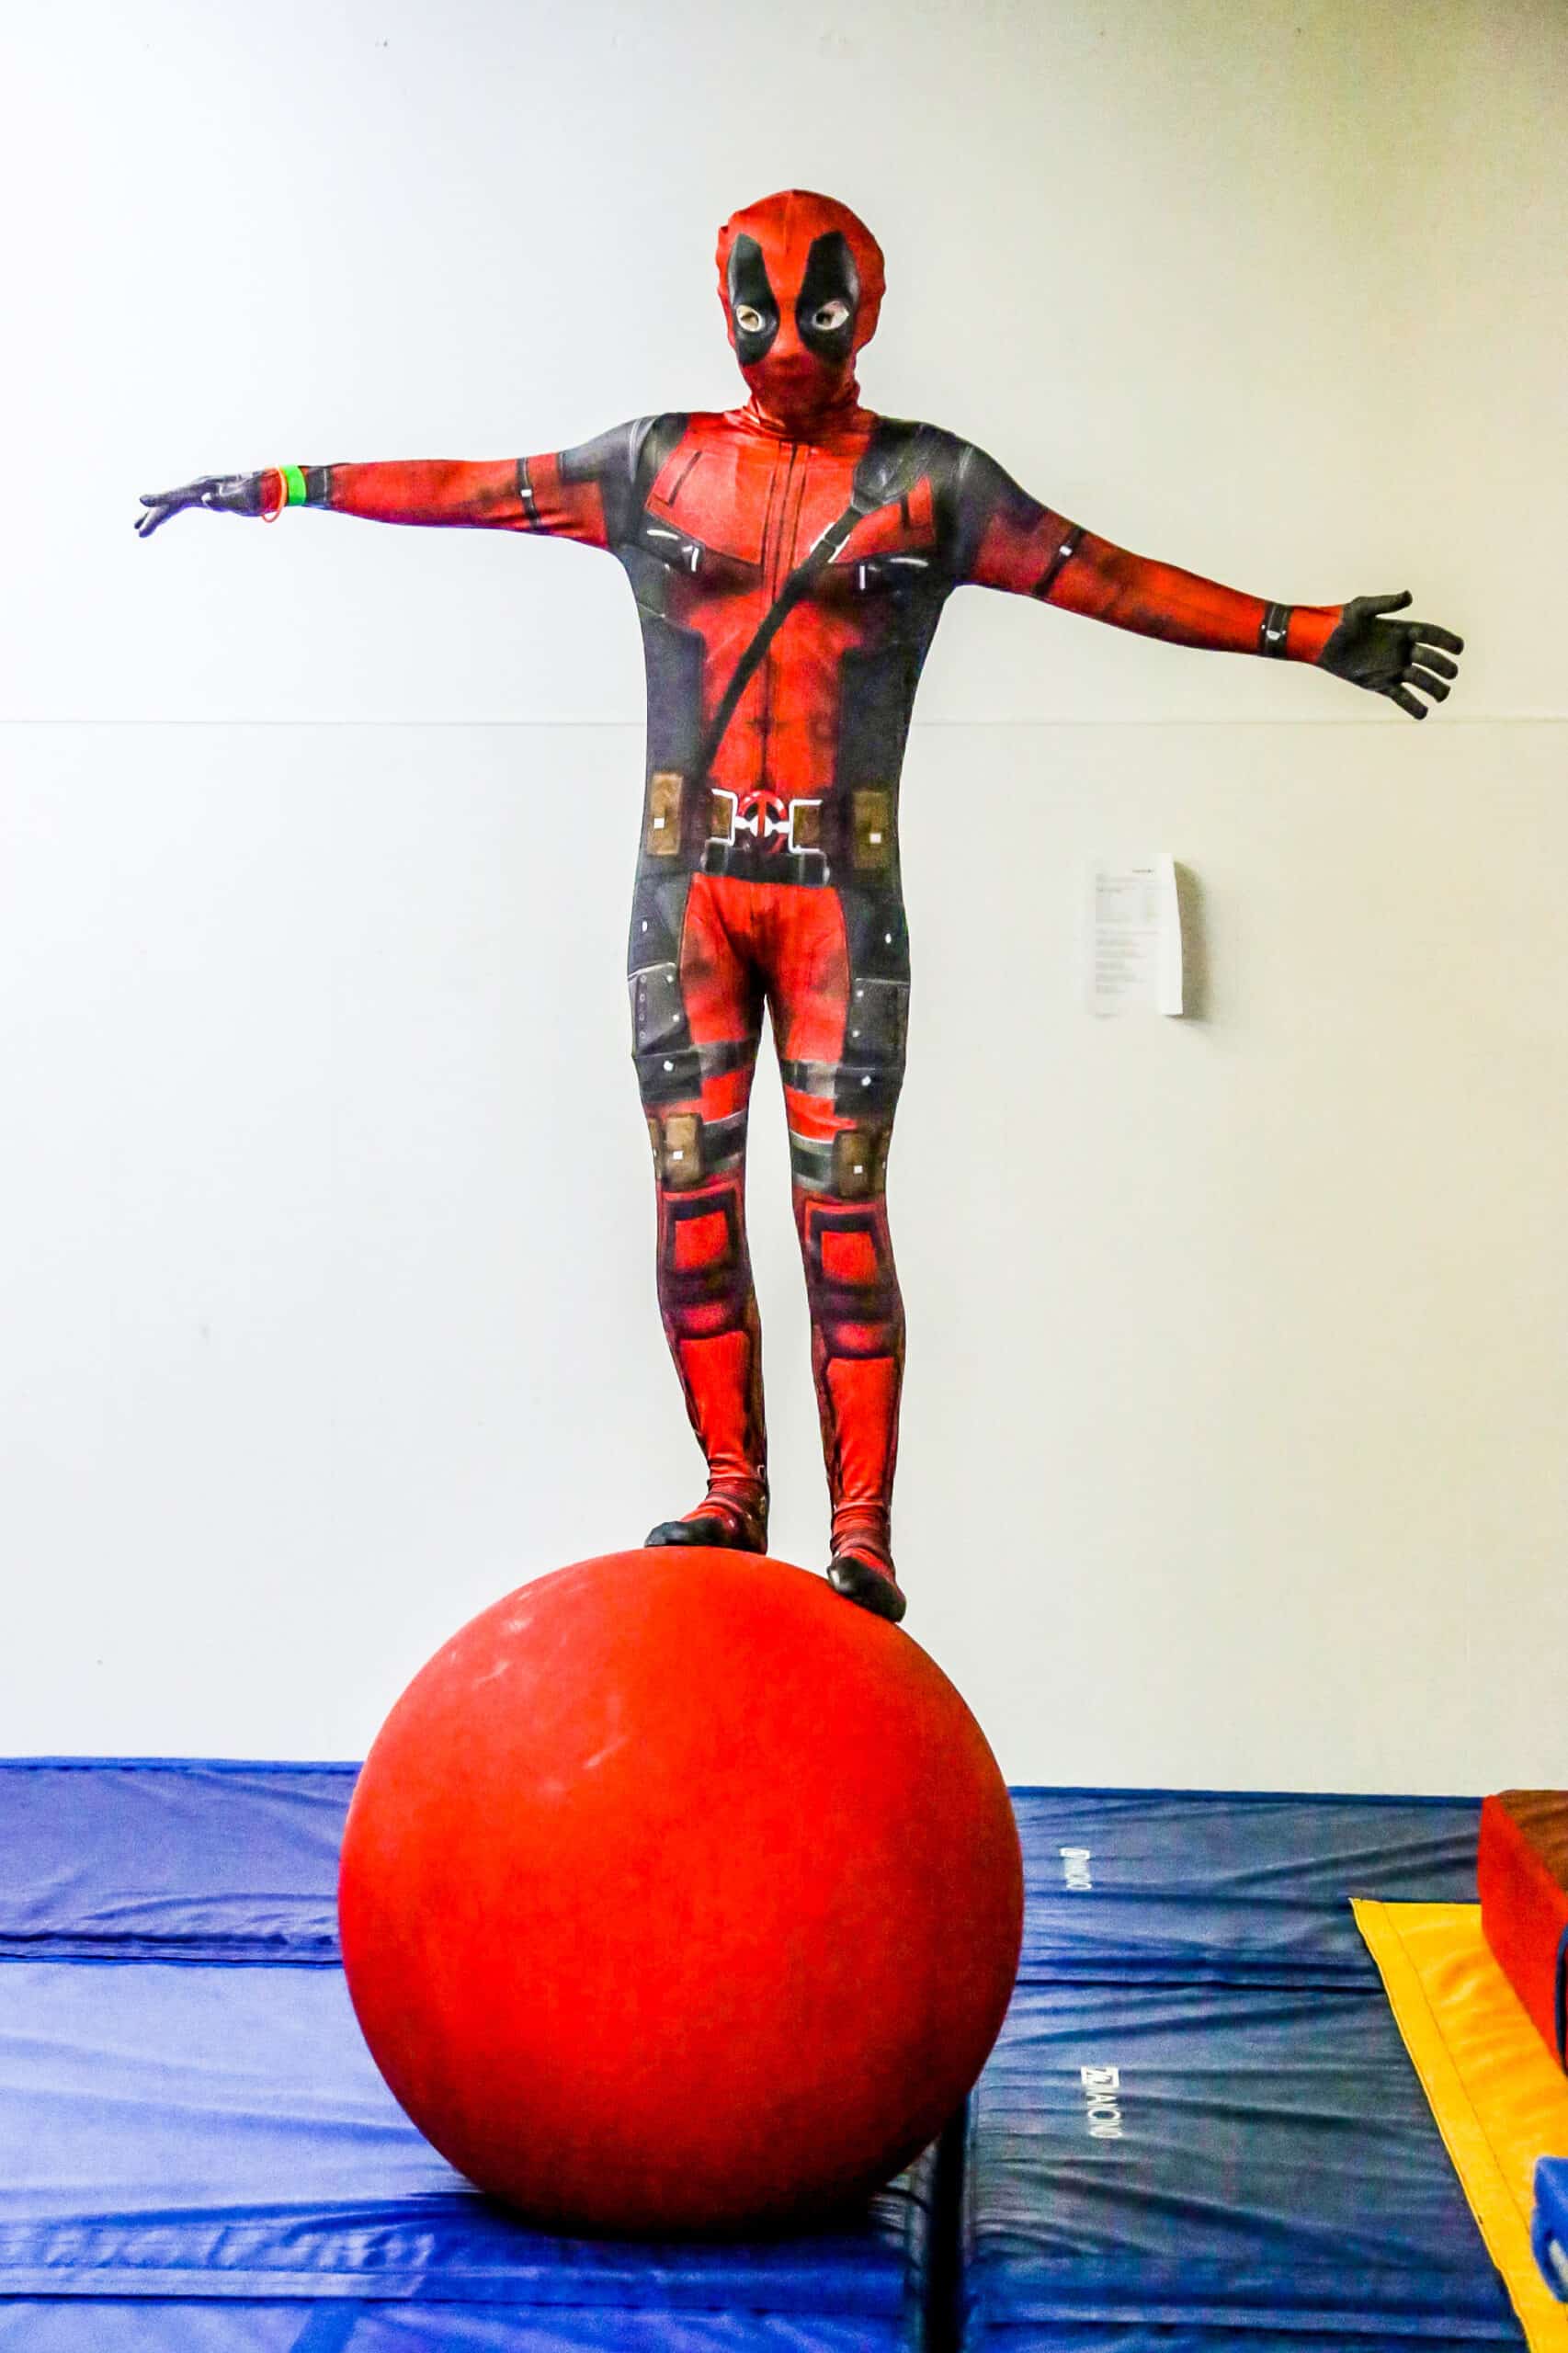 On Friday night October 28, 2022, Funtasicts Gymnastics 20060 Cortez Blvd. in Brooksville. Enter at your own Risk! Super Hero's, witches, fireman costumes all around the gym.